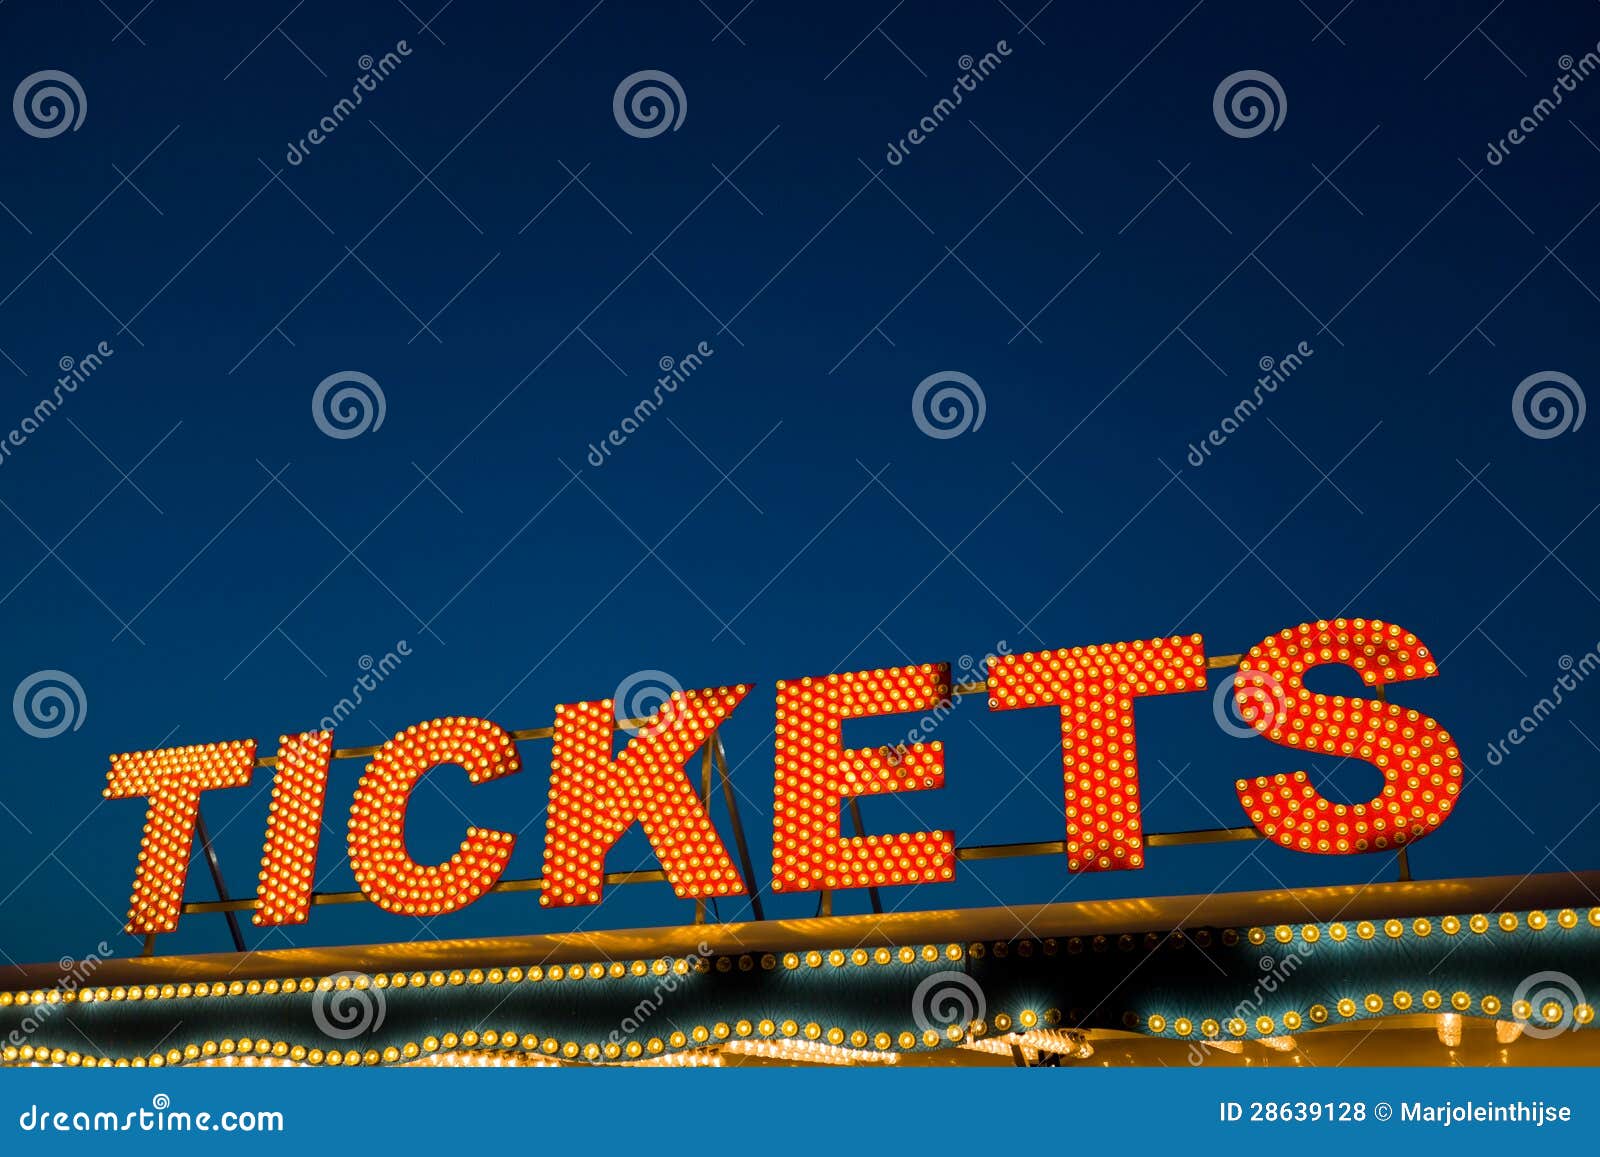 tickets sign